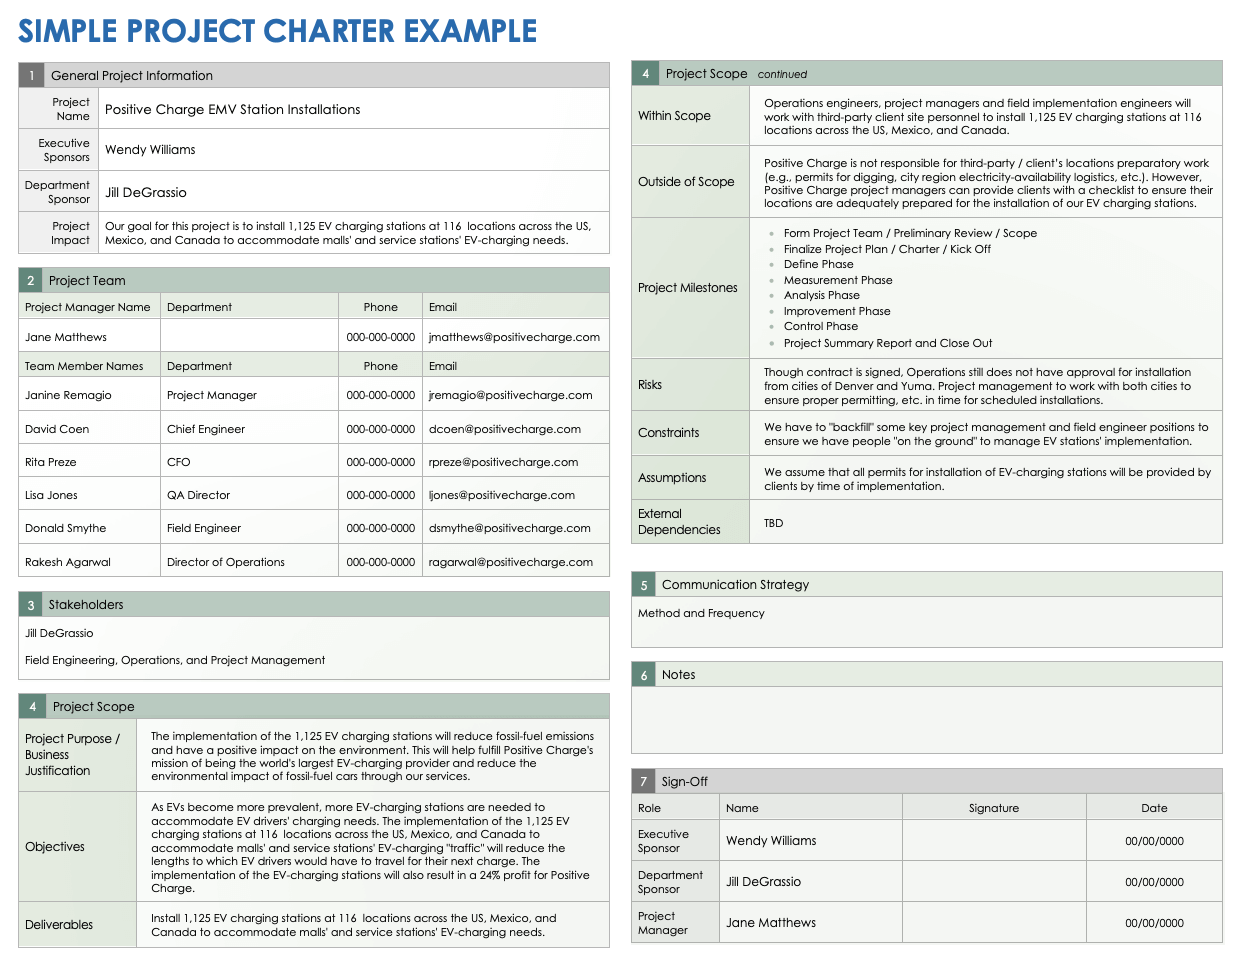 Simple Project Charter Form Example